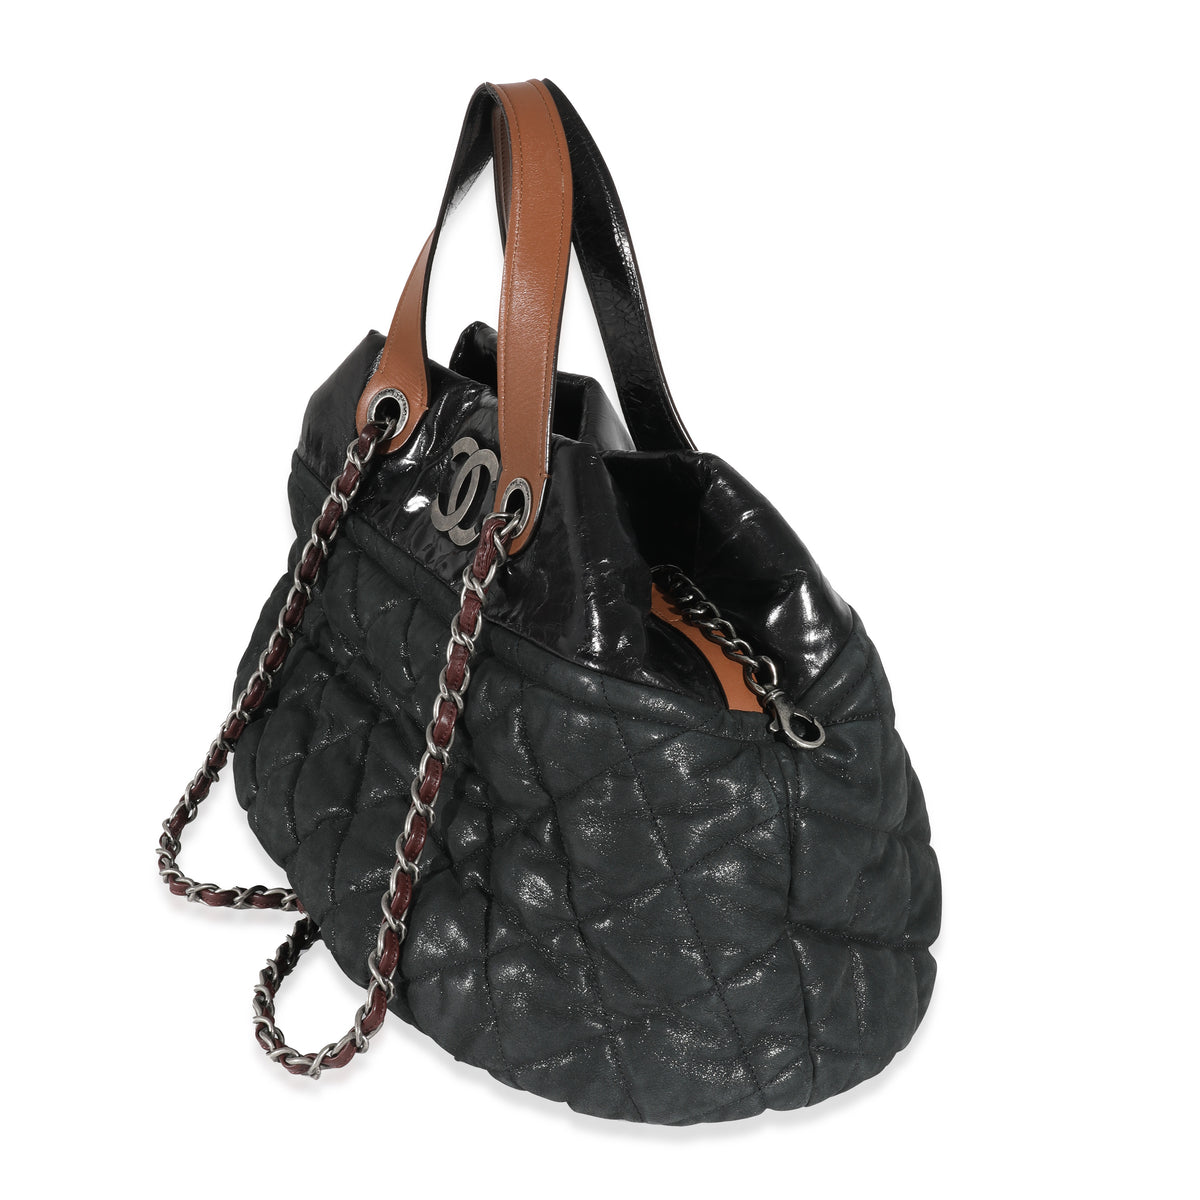 Chanel Black Iridescent Calfskin Quilted In The Mix Tote